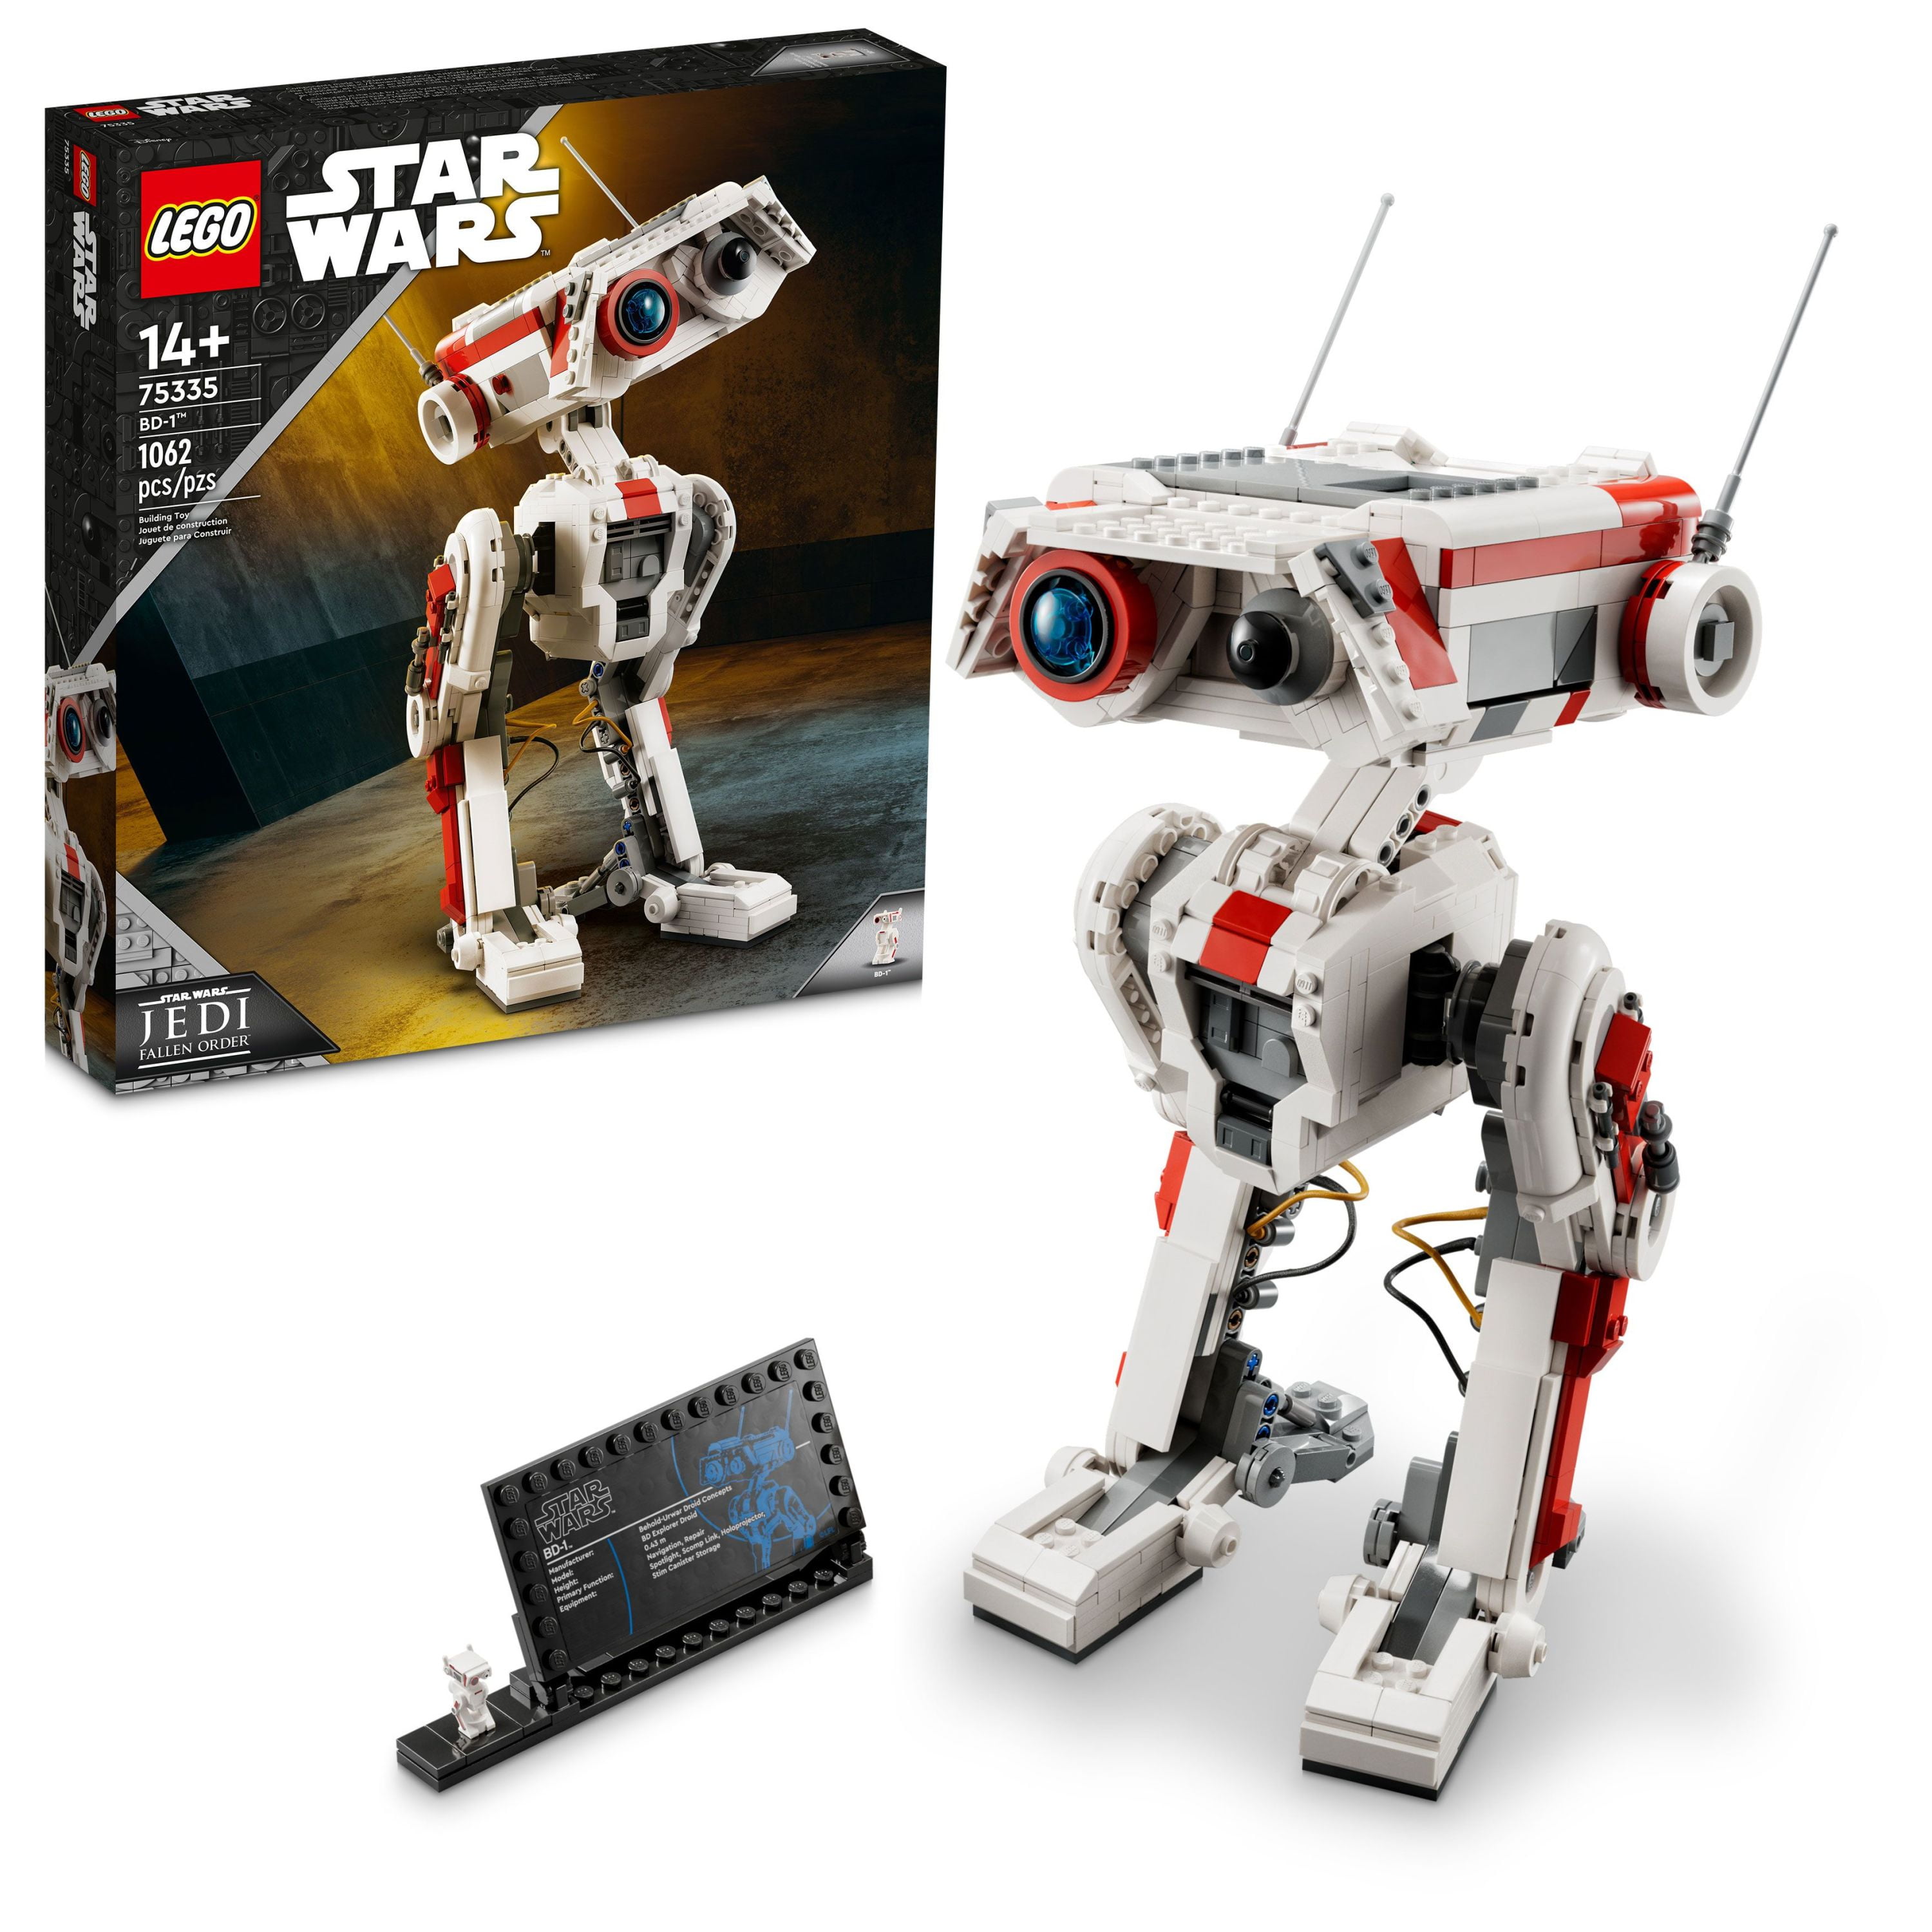 LEGO Star Wars BD-1 75335 Posable Droid Figure Model Building Kit, Room Decoration, Memorabilia Gift Idea for Teenagers from the Jedi: Fallen Order Video Game